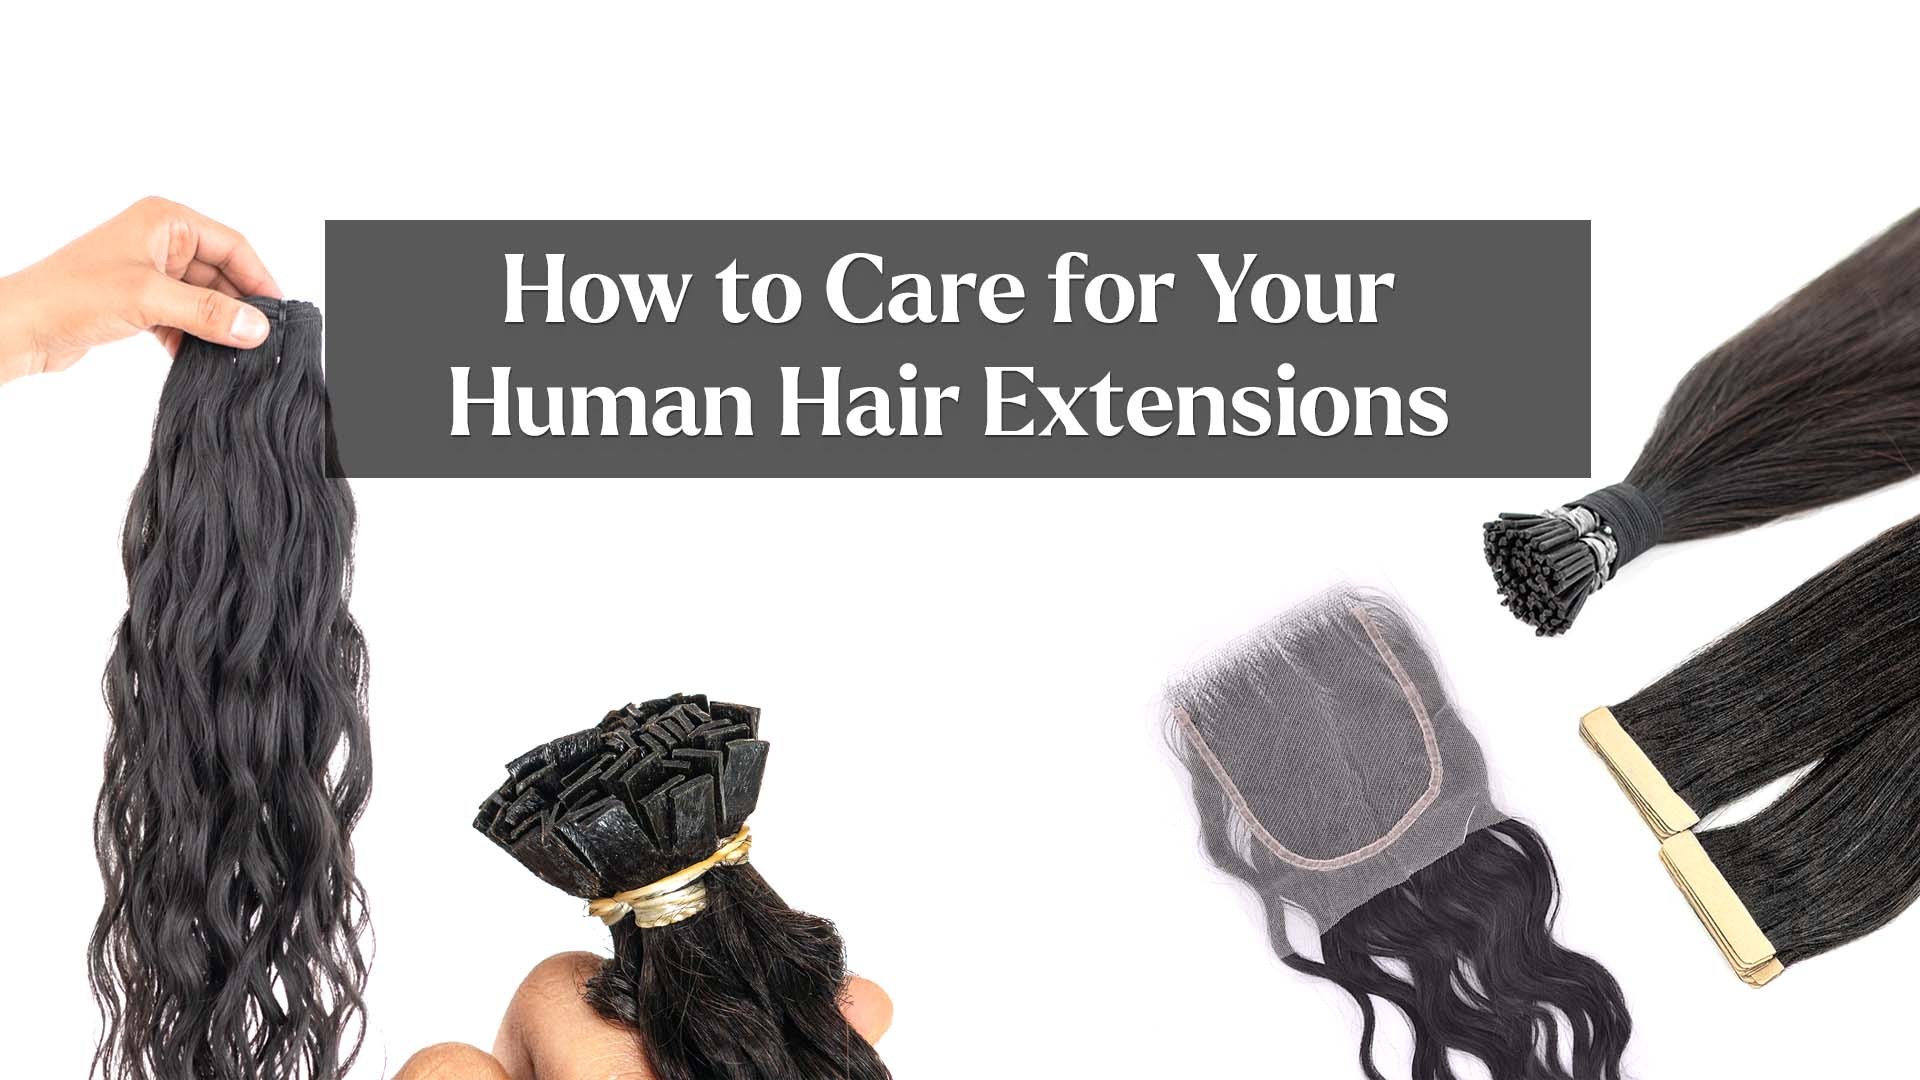 How to Care for Your Human Hair Extensions to Keep Them Looking Fresh